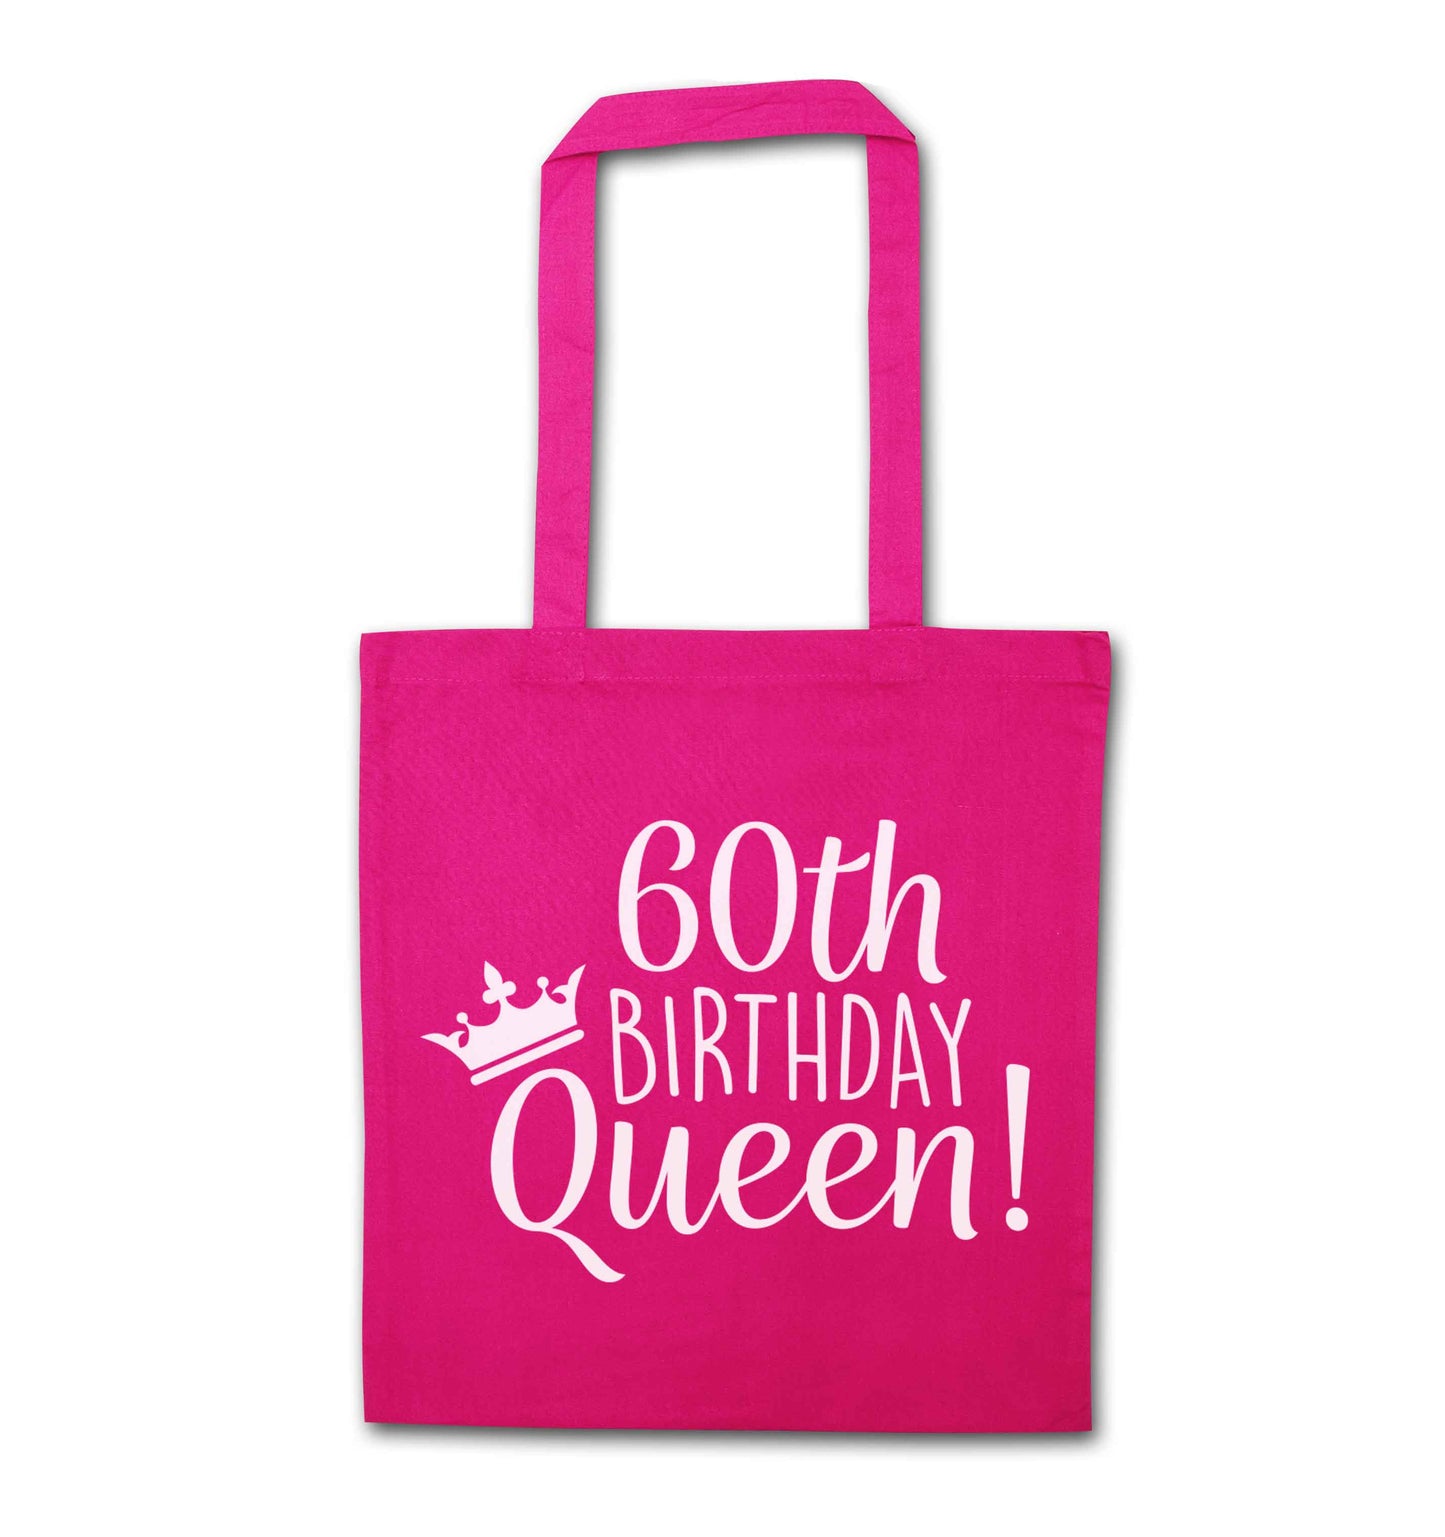 60th birthday Queen pink tote bag